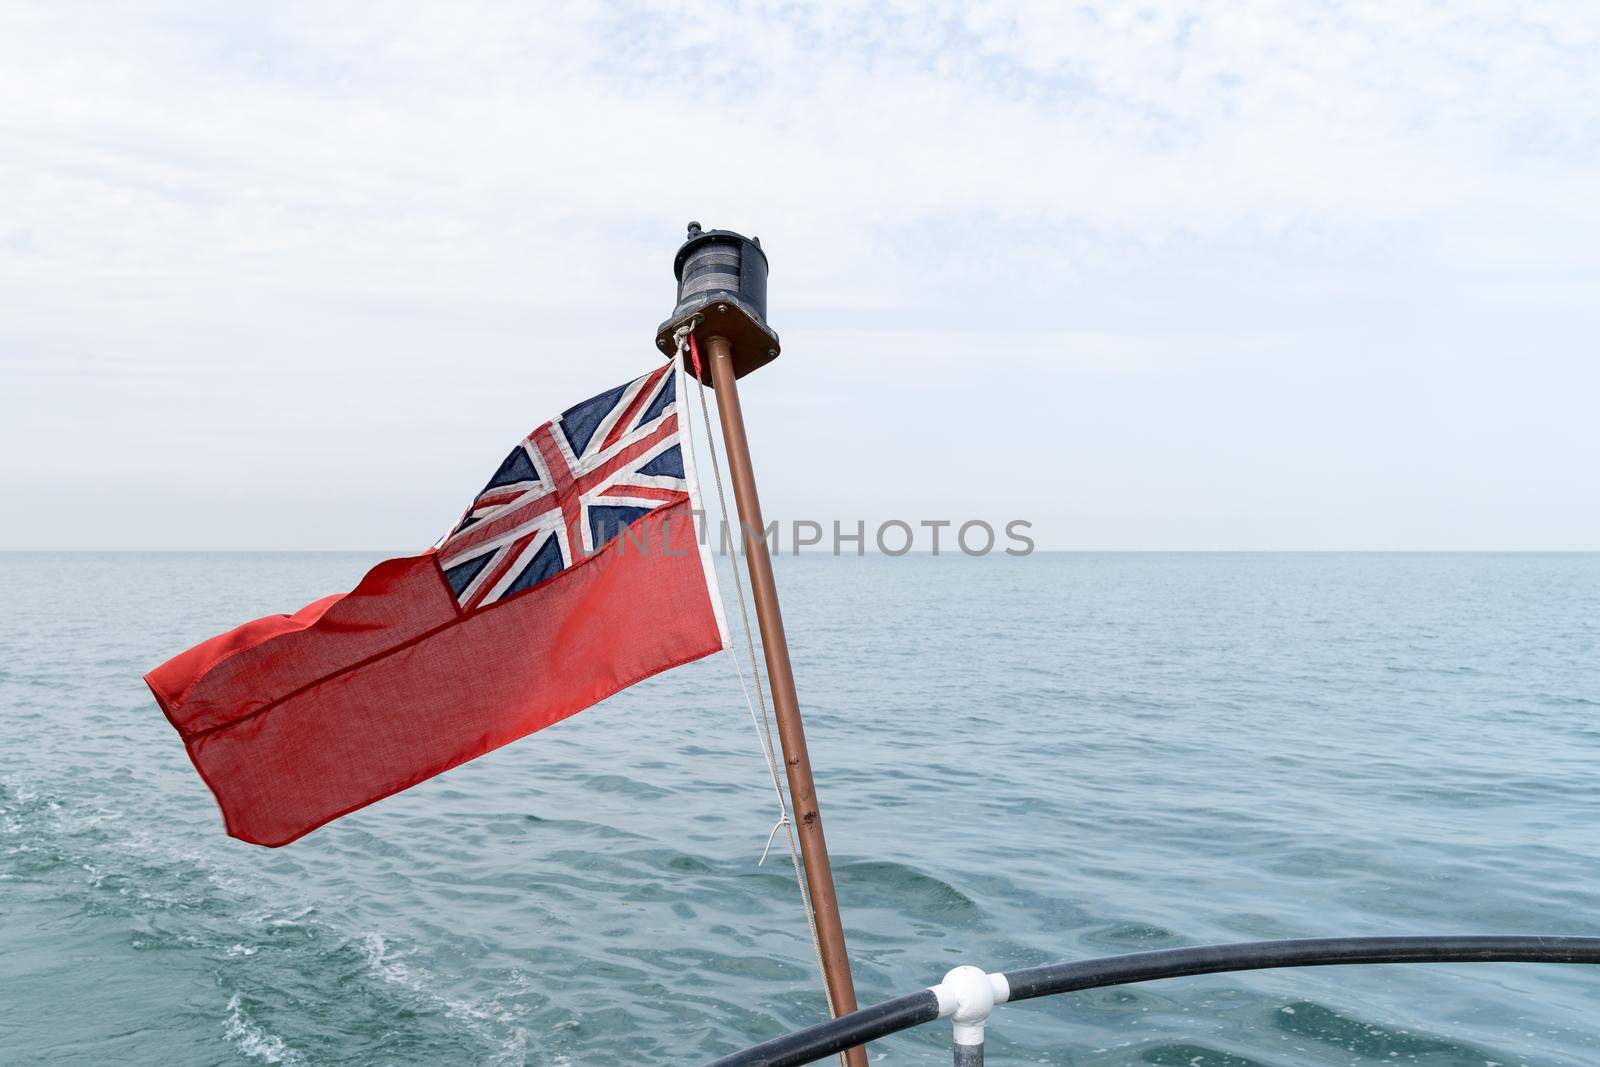 an Uk red ensign the british maritime flag flown from yacht with the sea and sky behind it